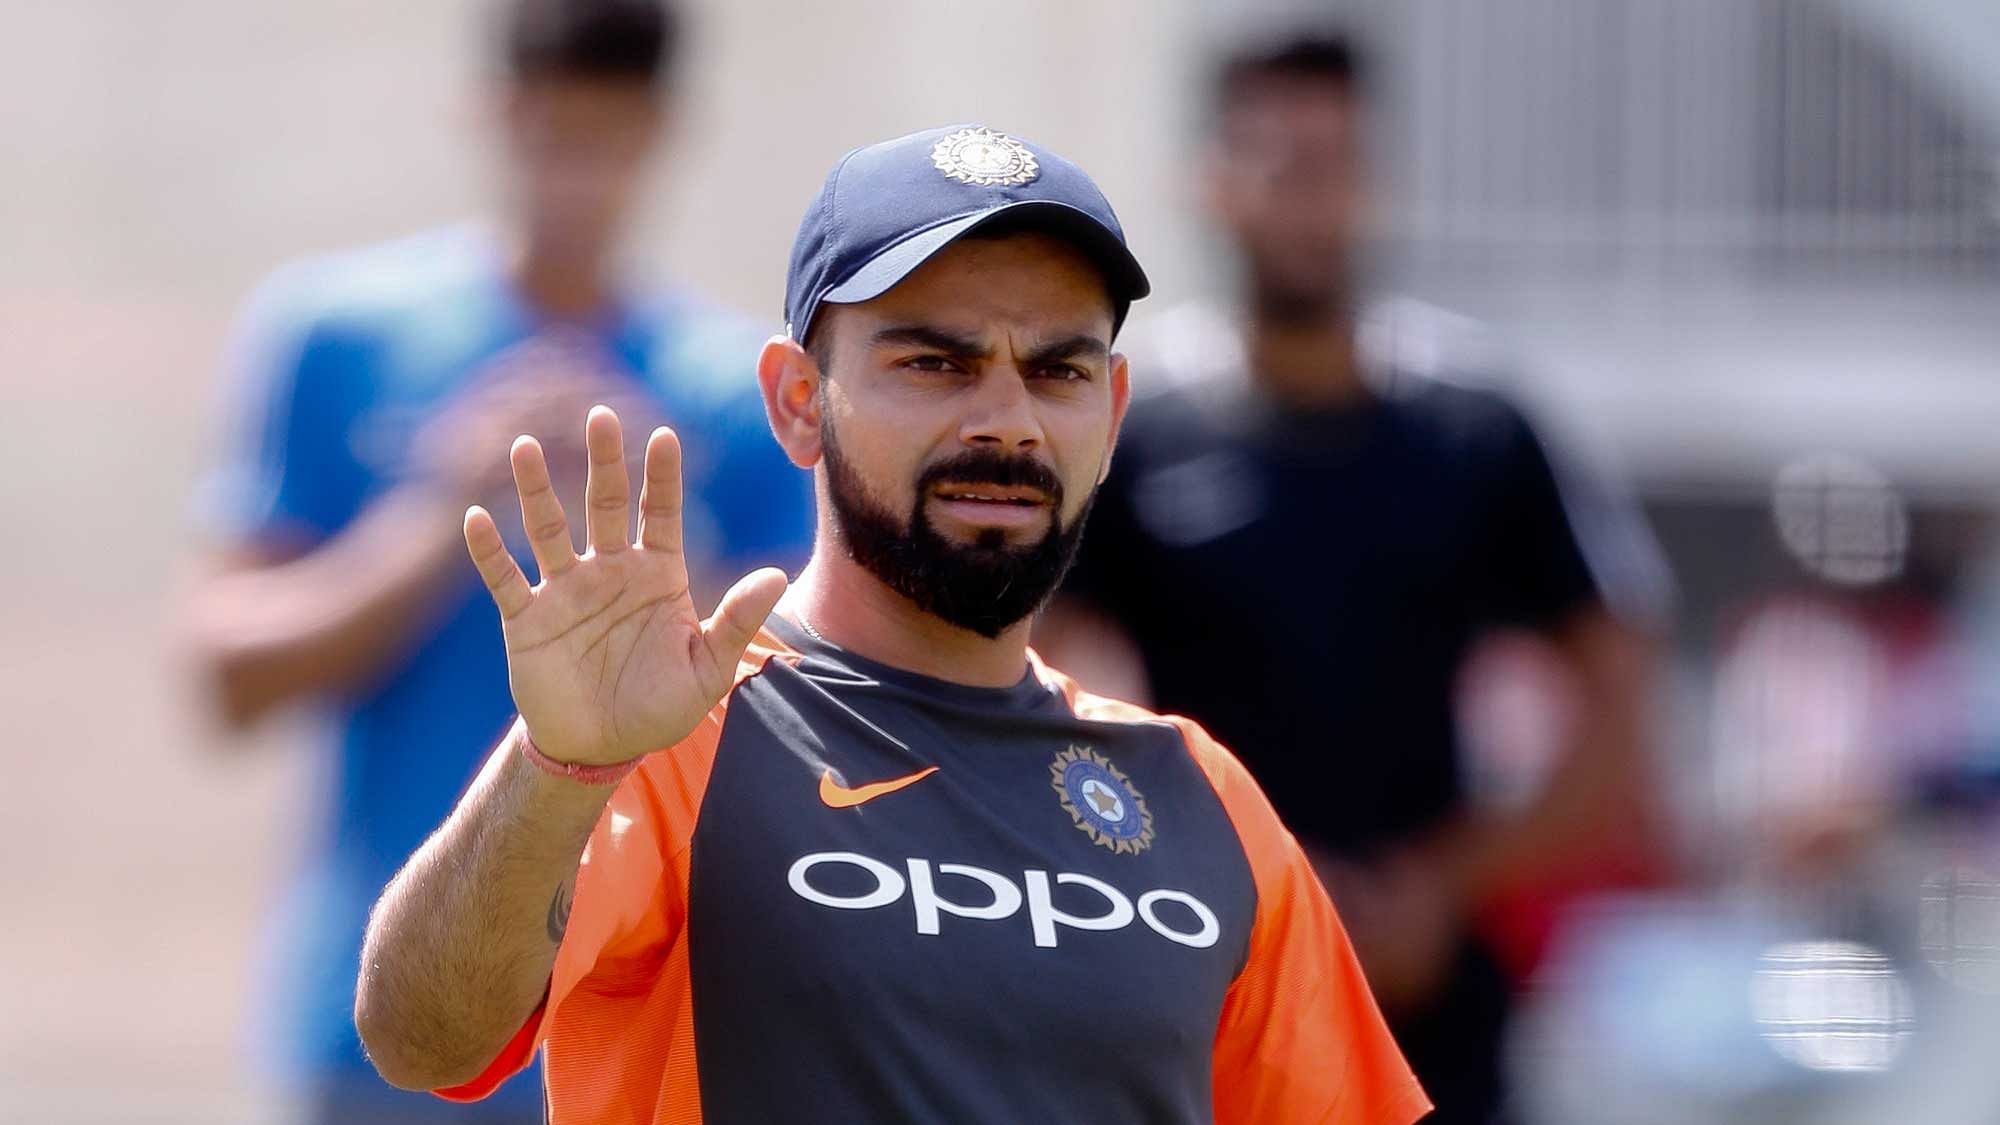 Why could Virat Kohli not have been rested during the West Indies series instead of missing the all-important India-Pakistan matches at the Asia Cup?